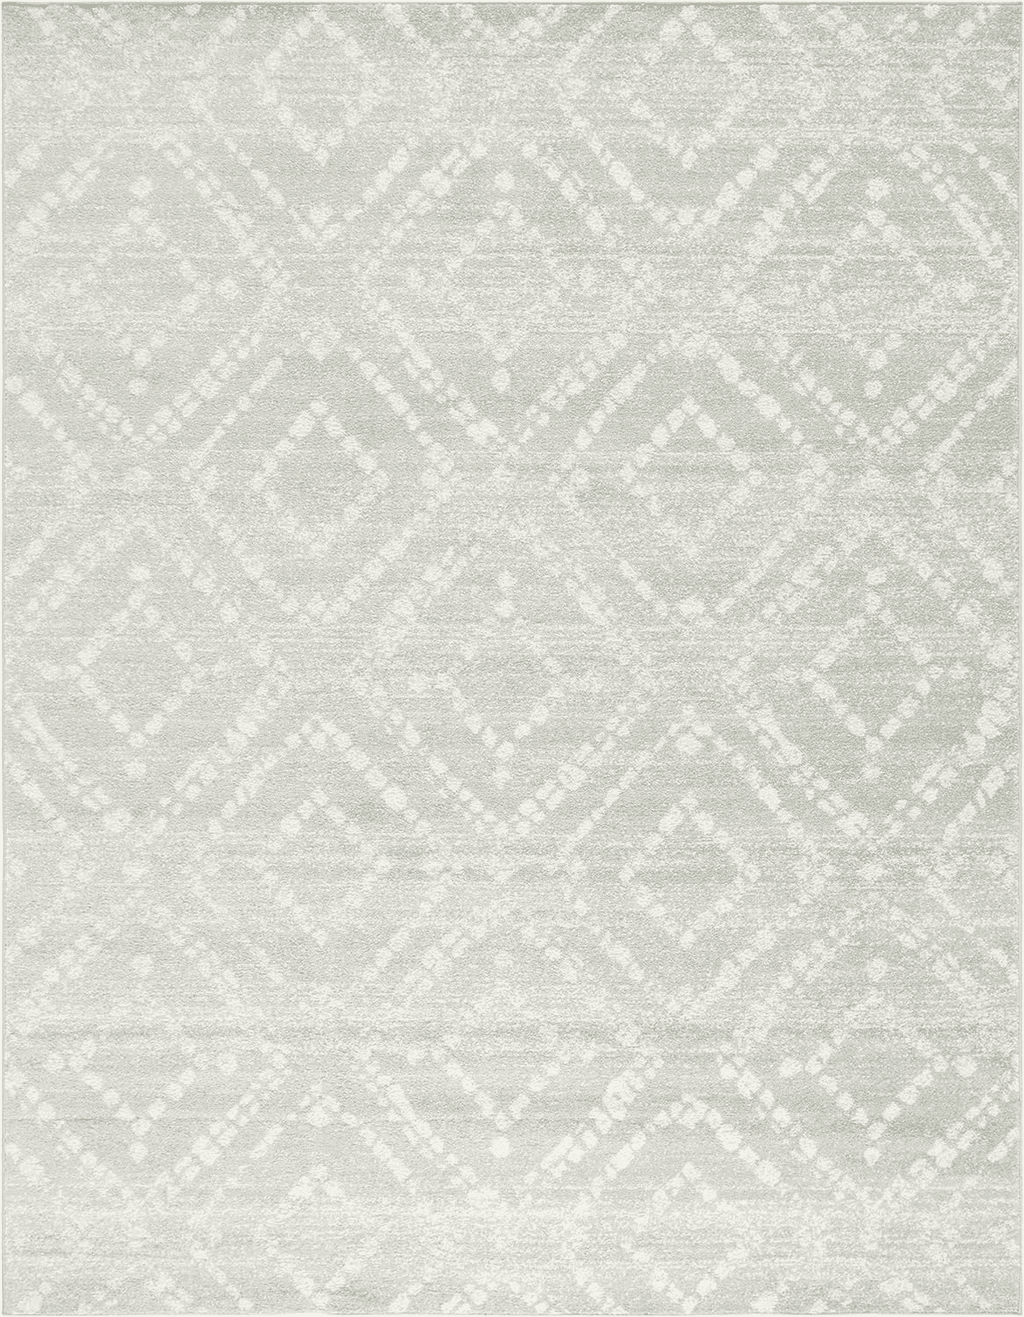 6x9 SAFAVIEH Adirondack Collection Area Rug - 6' x 9', Green & Ivory, Modern Diamond Distressed Design, Non-Shedding & Easy Care, Ideal for High Traffic Areas in Living Room, Bedroom (ADR131Y)